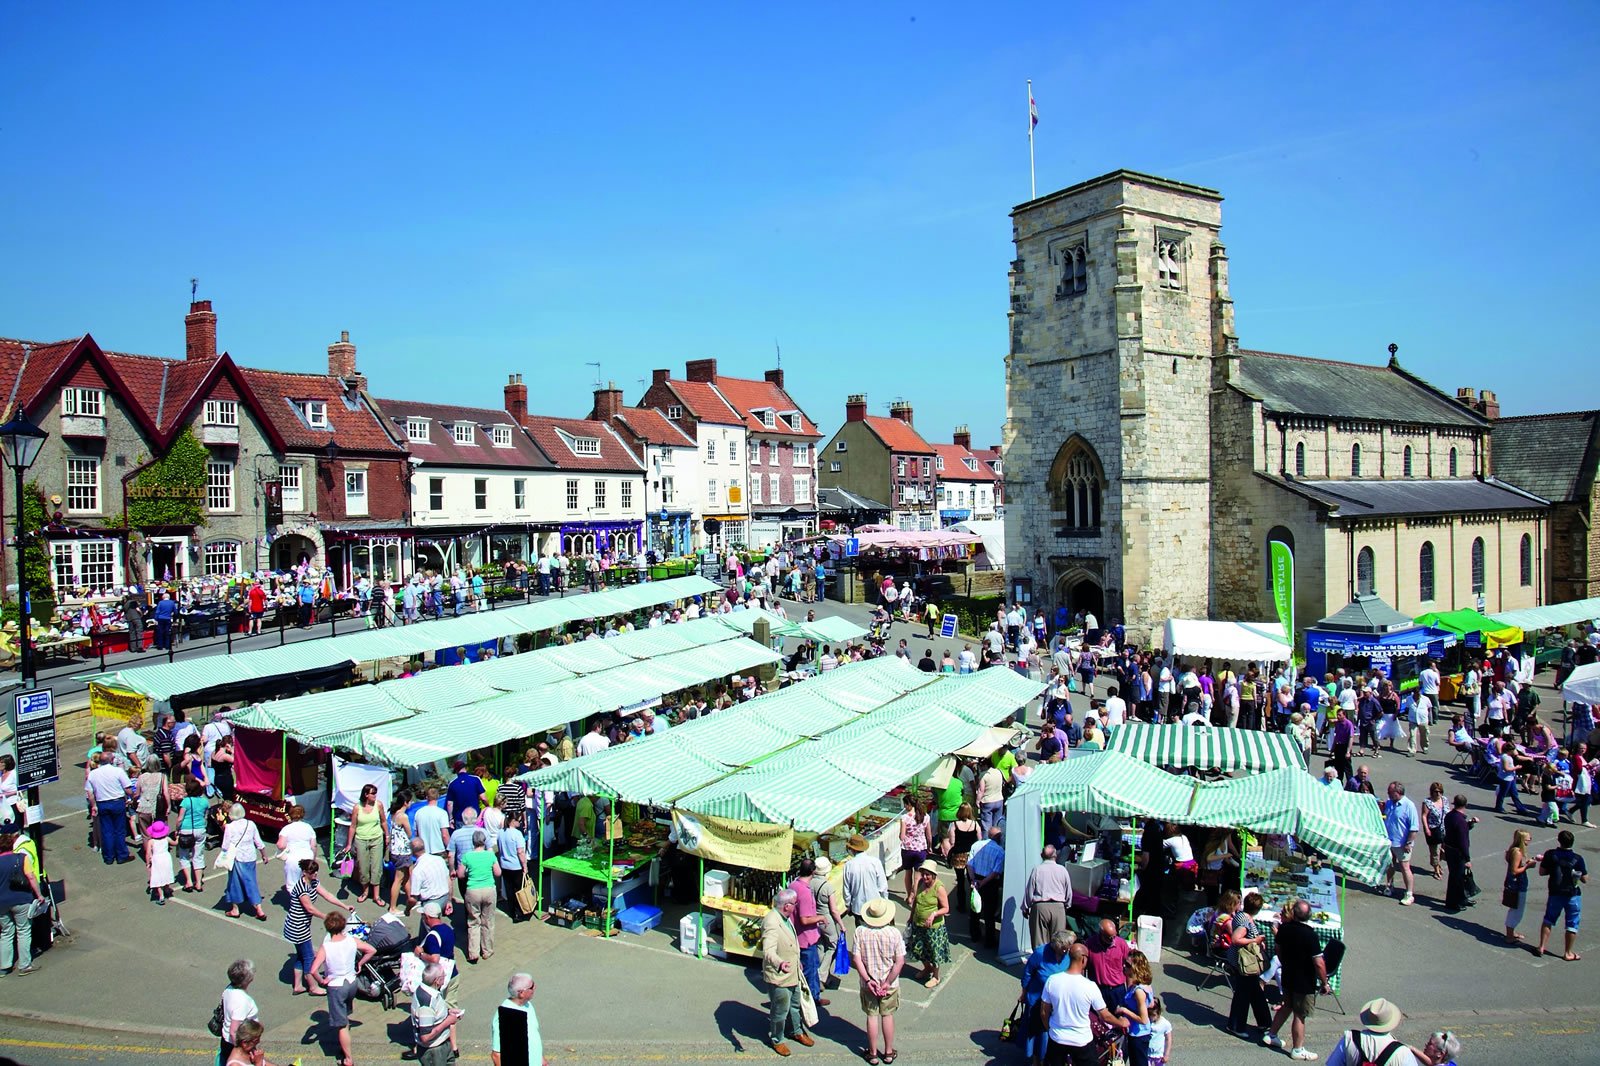 Image name malton market the 1 image from the post City Town and Farmers Markets in Yorkshire.com.